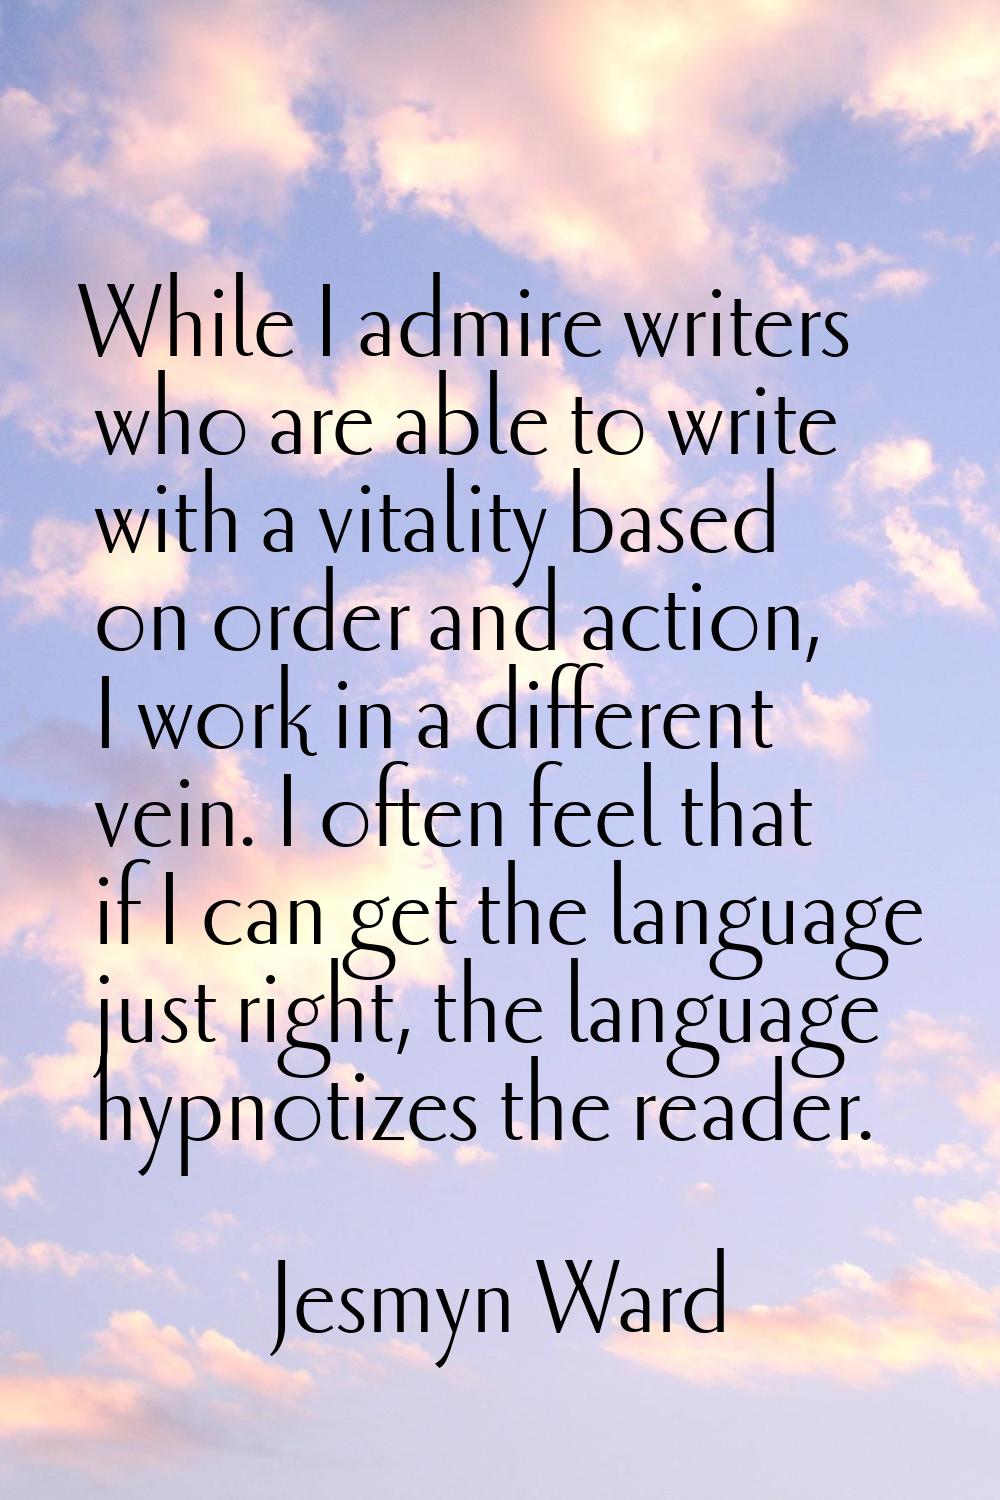 While I admire writers who are able to write with a vitality based on order and action, I work in a